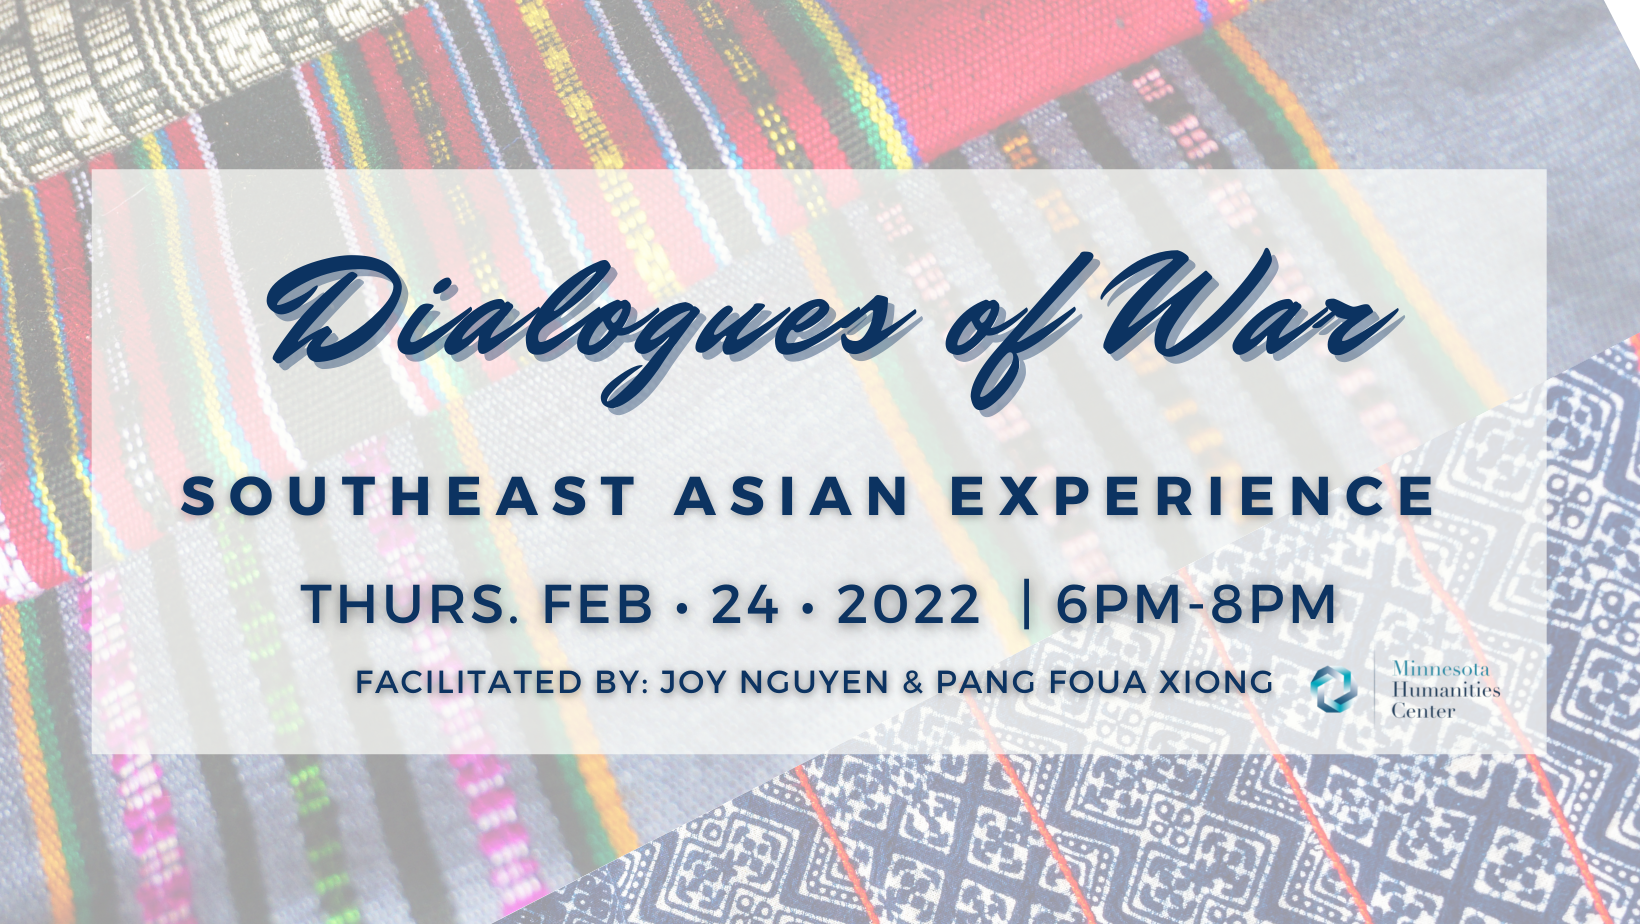 Dialogues of War Listening Session: Southeast Asian Experience